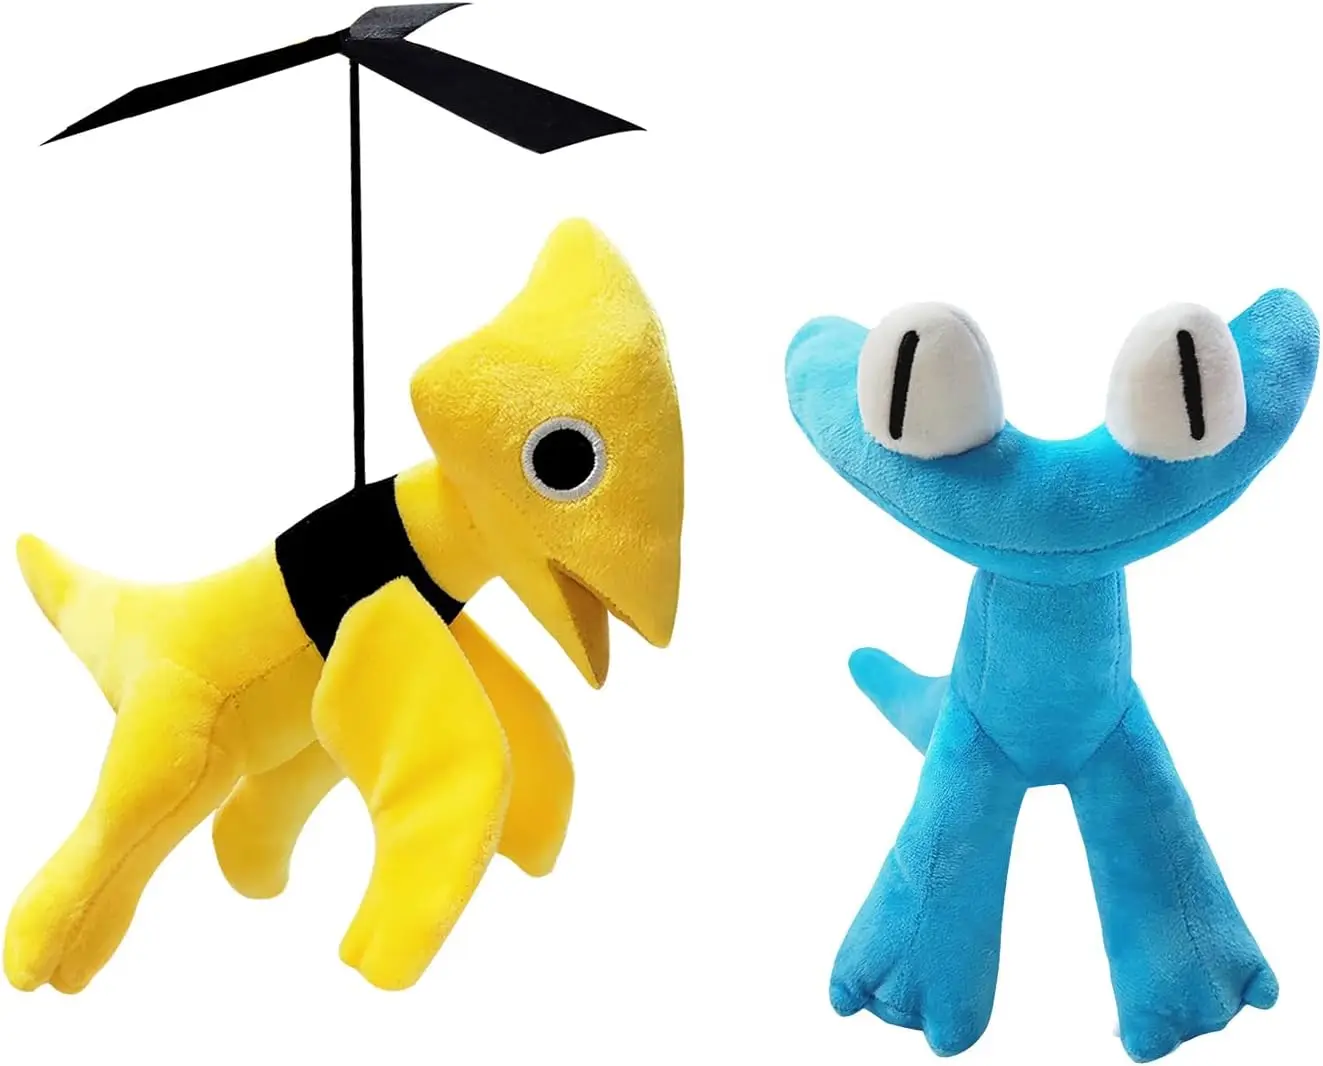 

Rainbow Friend Chapter 2 Plush Toy Stuffed Animal Cyan and Yellow Plushie Doll Toys Gift for Kids Children 9.8in (Cyan + Yellow)